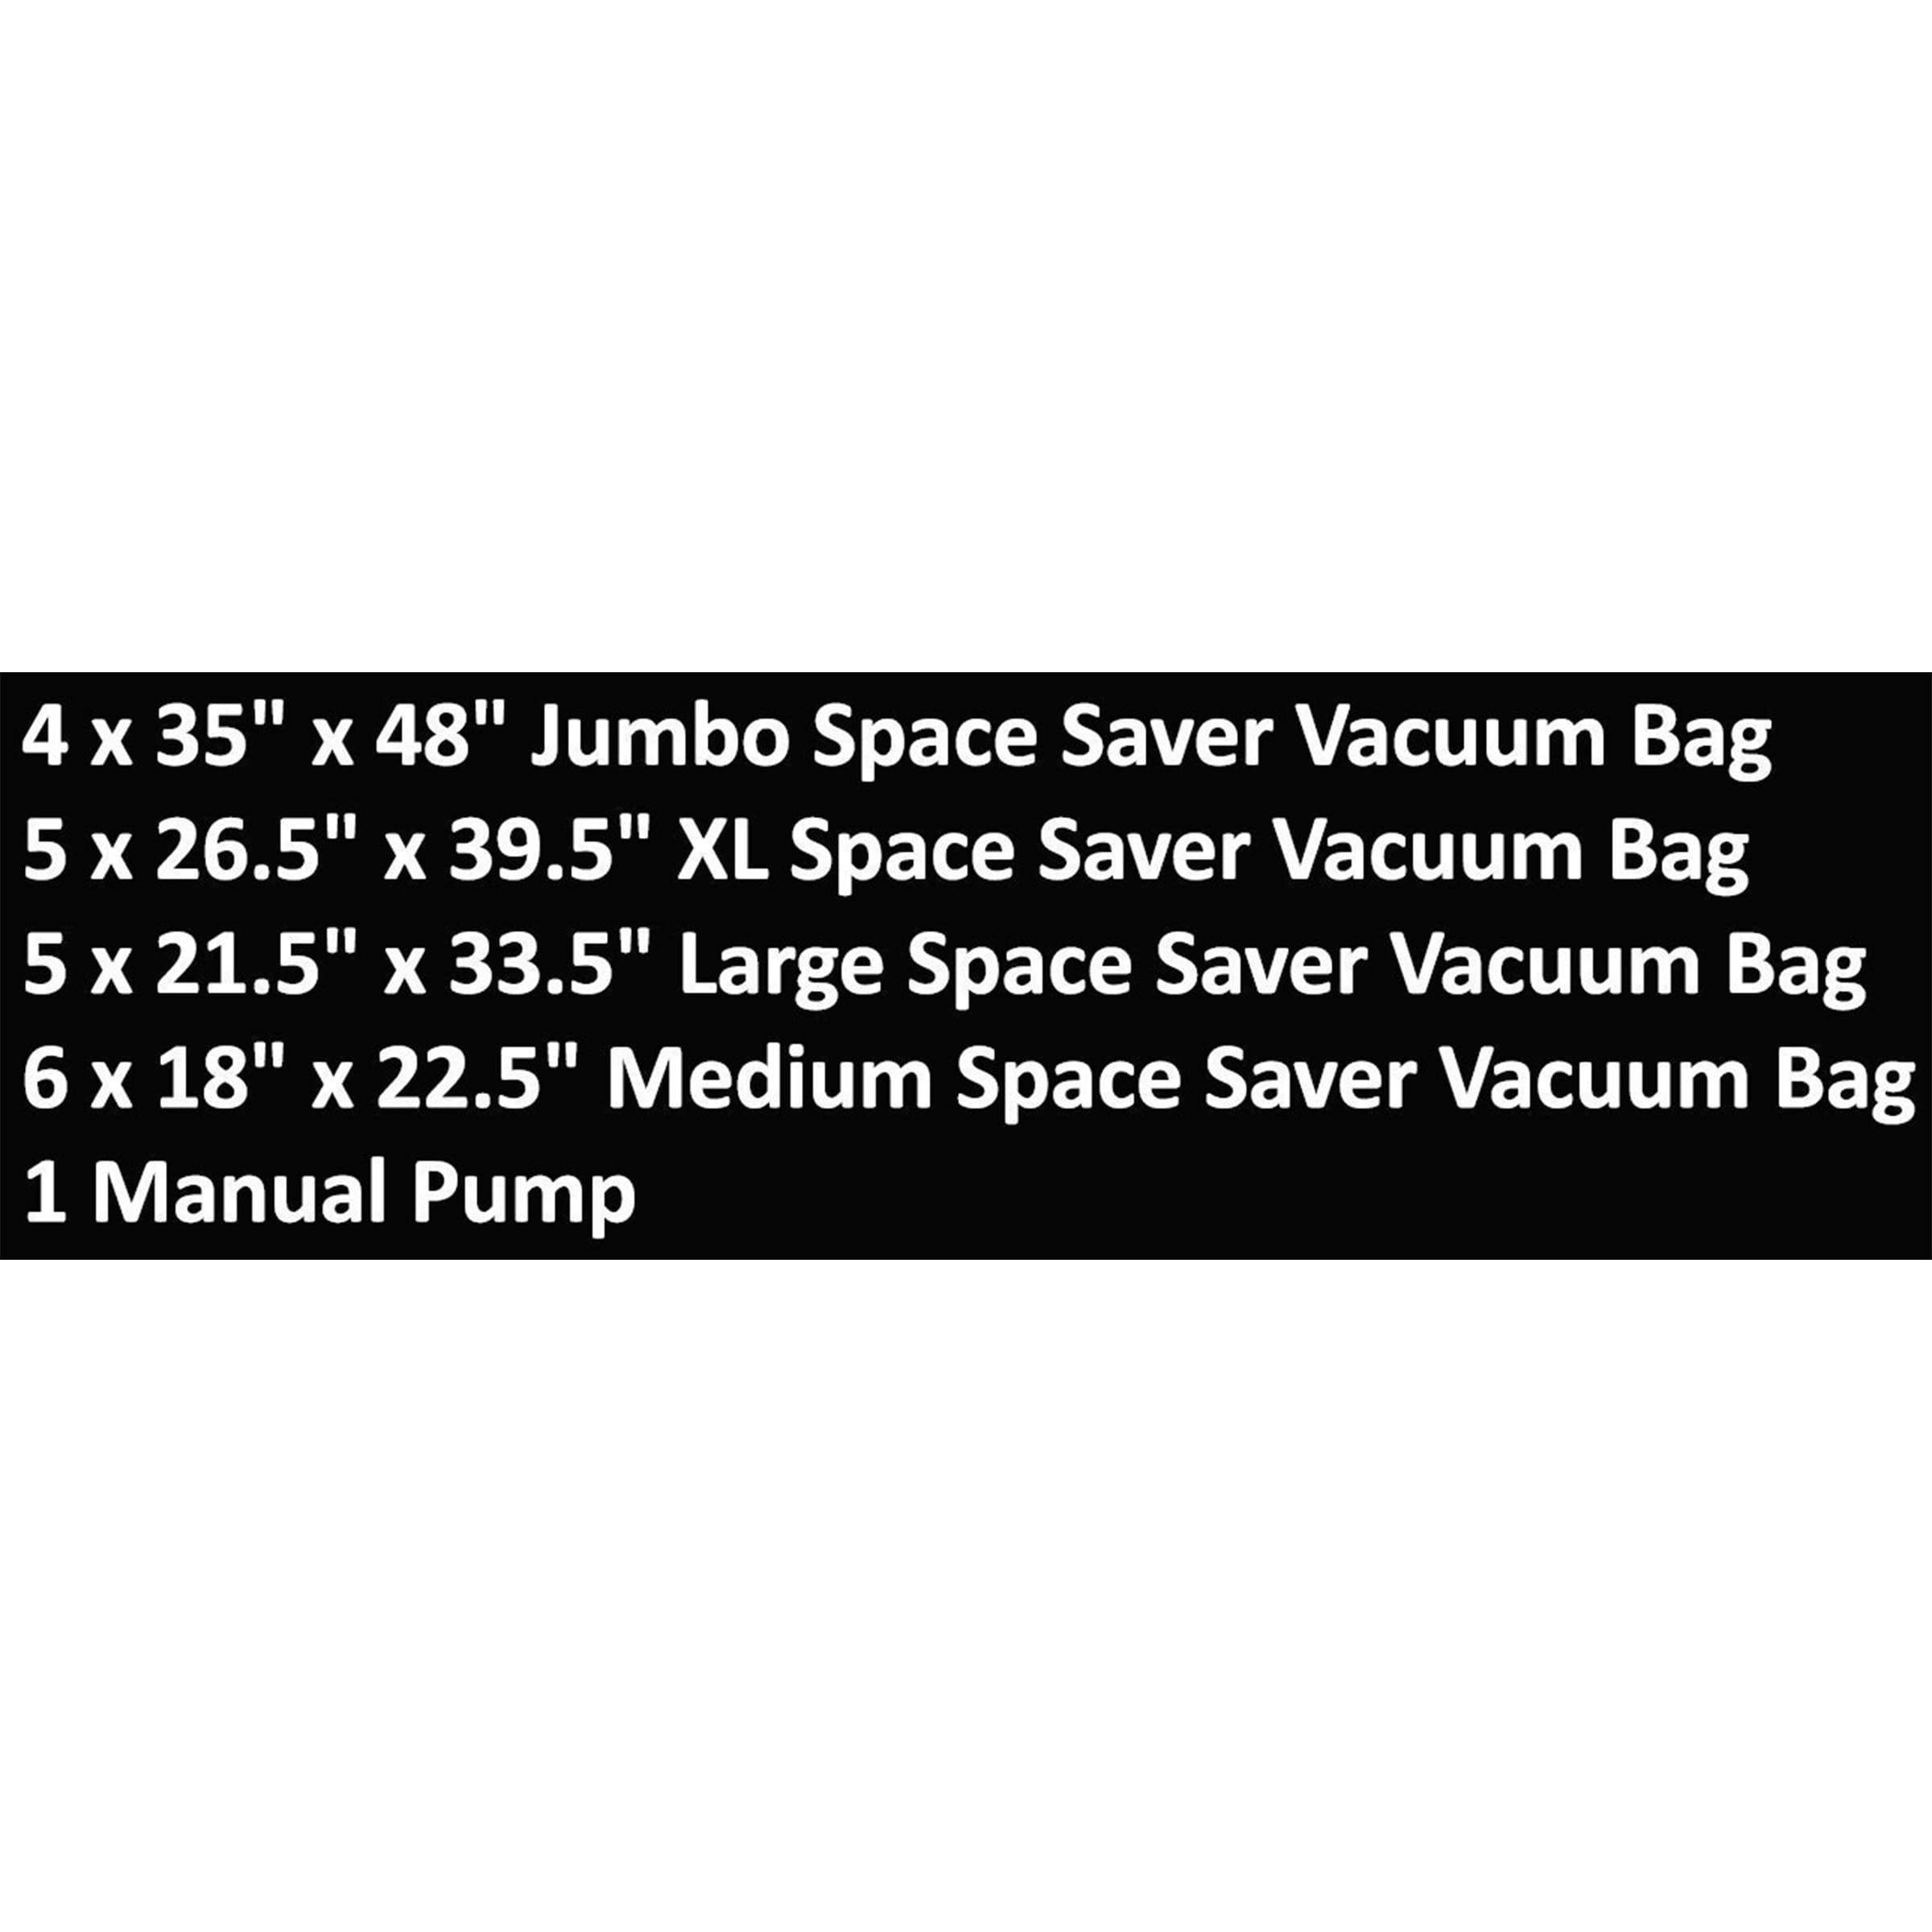 Simple Houseware 10 Vacuum Storage Bags to Space Saver for Bedding, Pillows, Towel, Blanket, Clothes Bags (5 x Extra Large, 5 x Large)